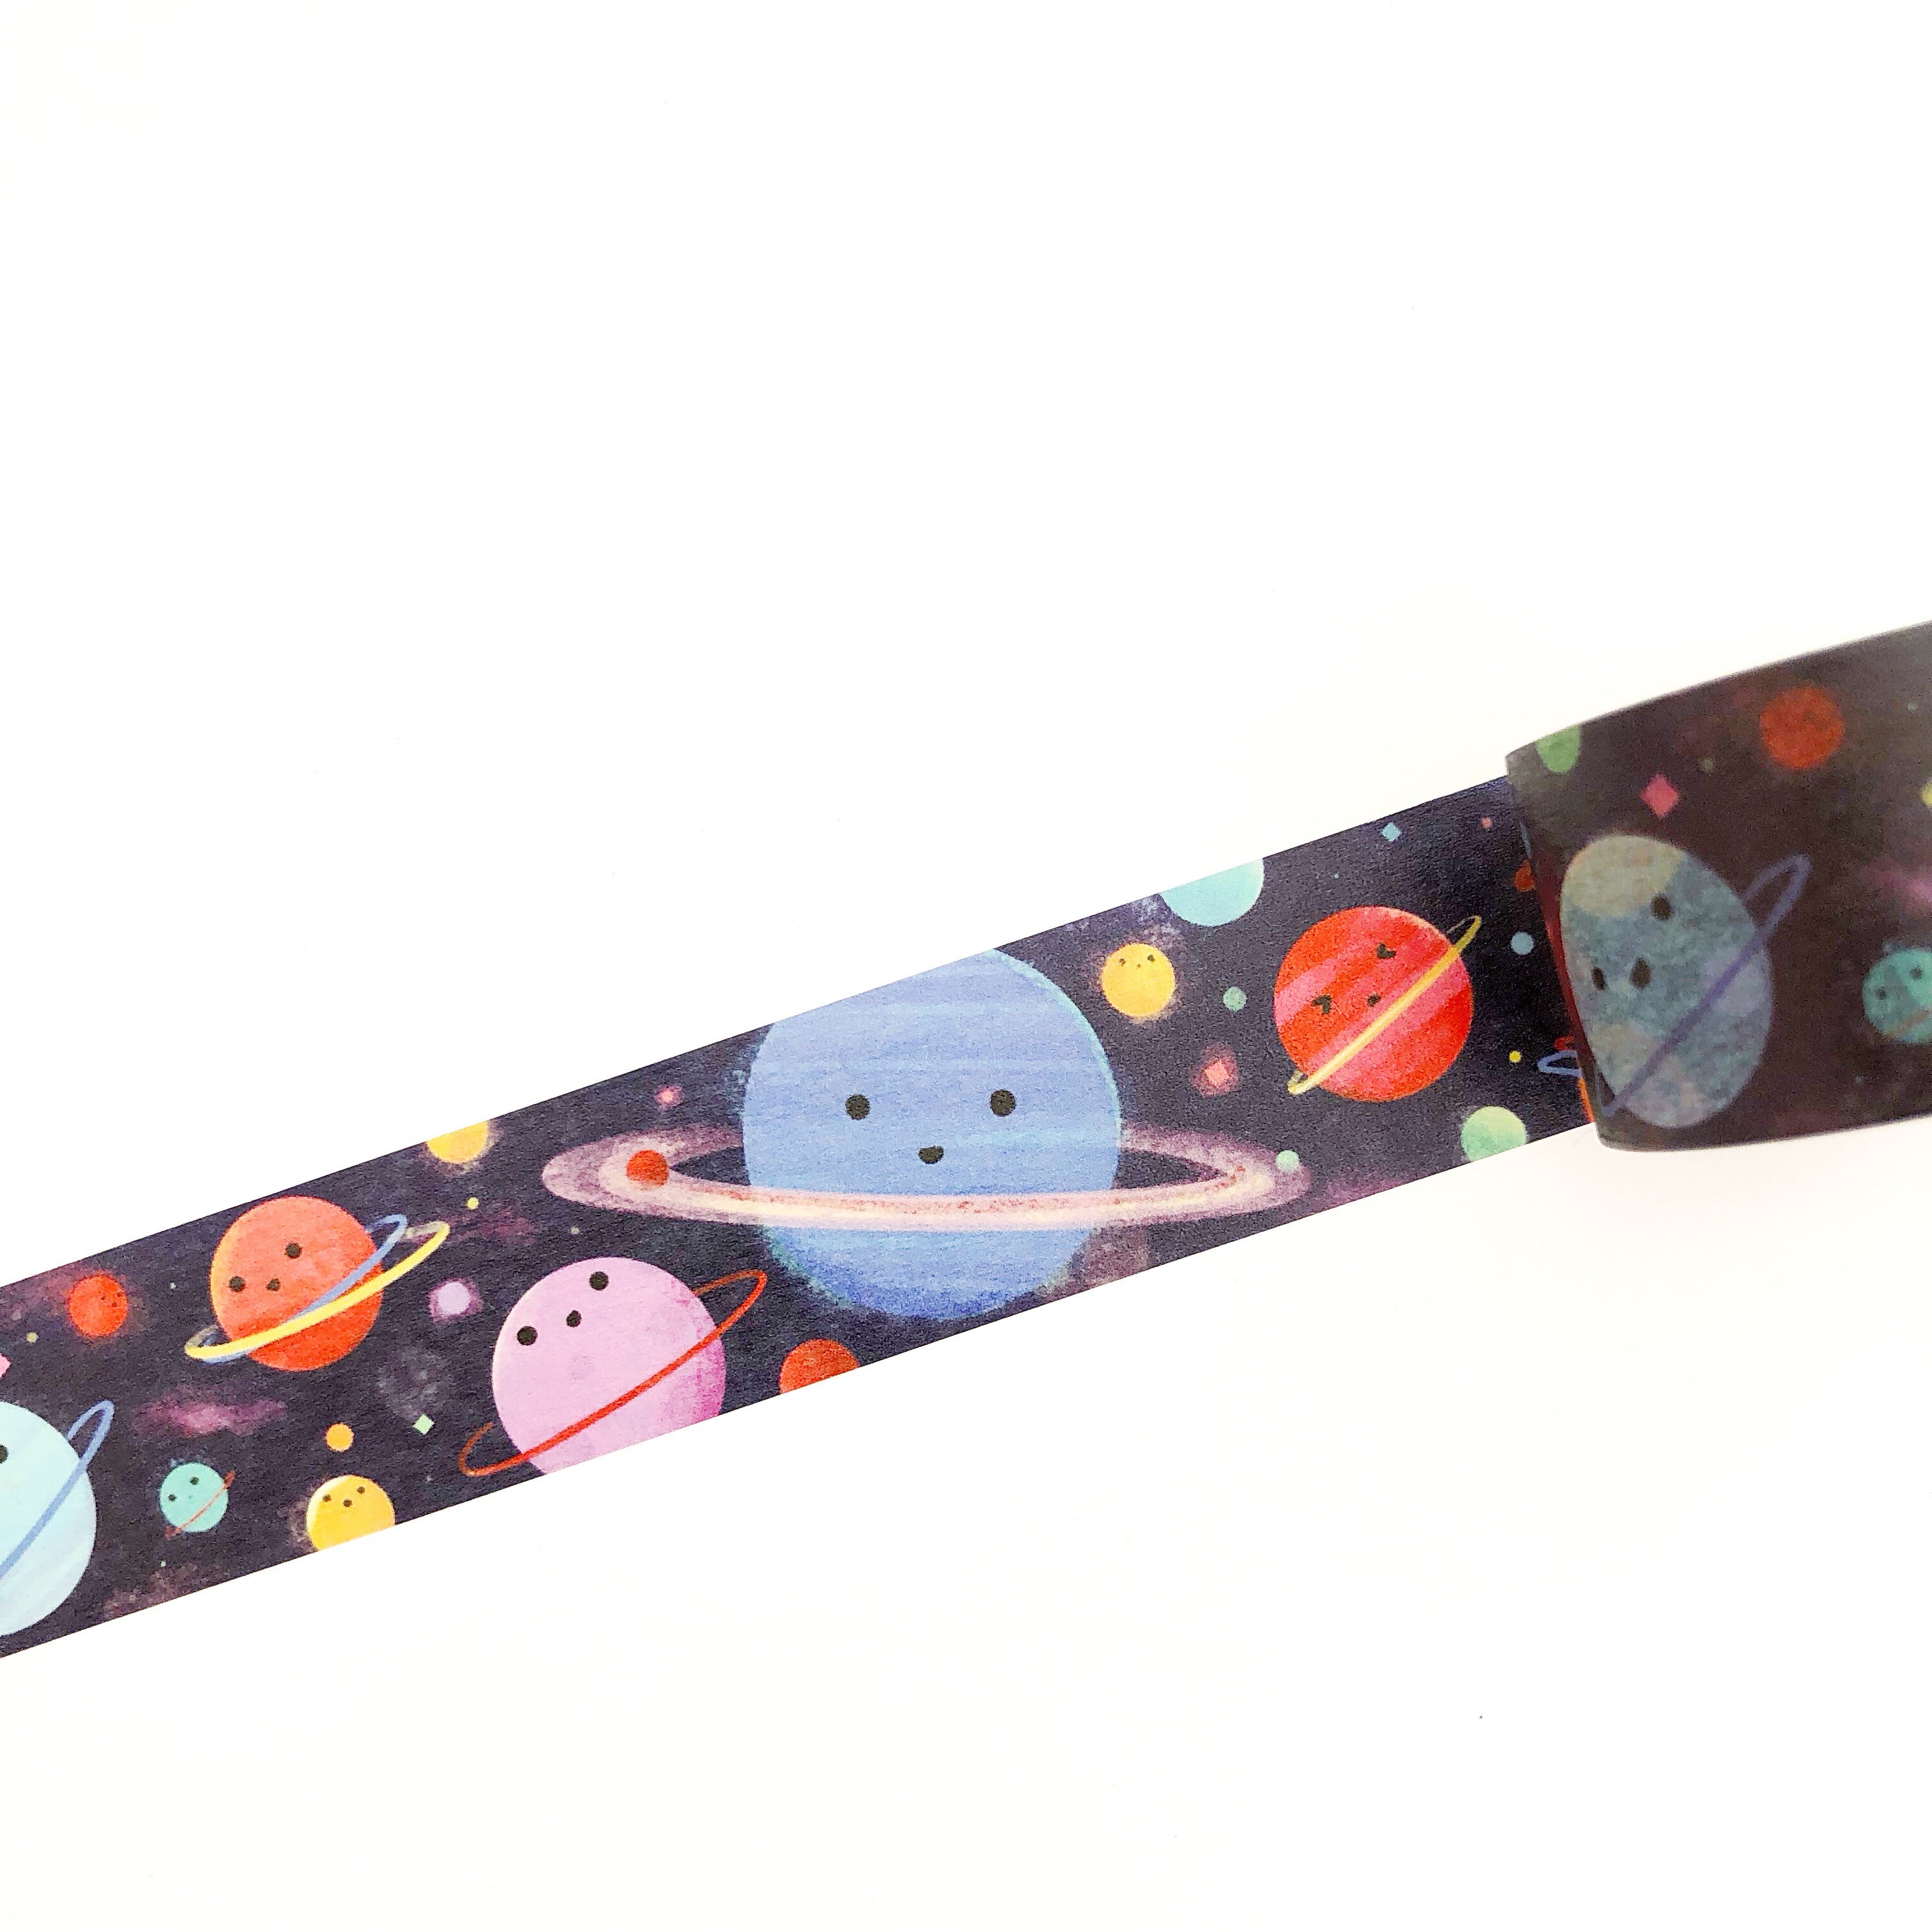 Black tape with images of outer space planets, moons and the galaxy in a repeating pattern.